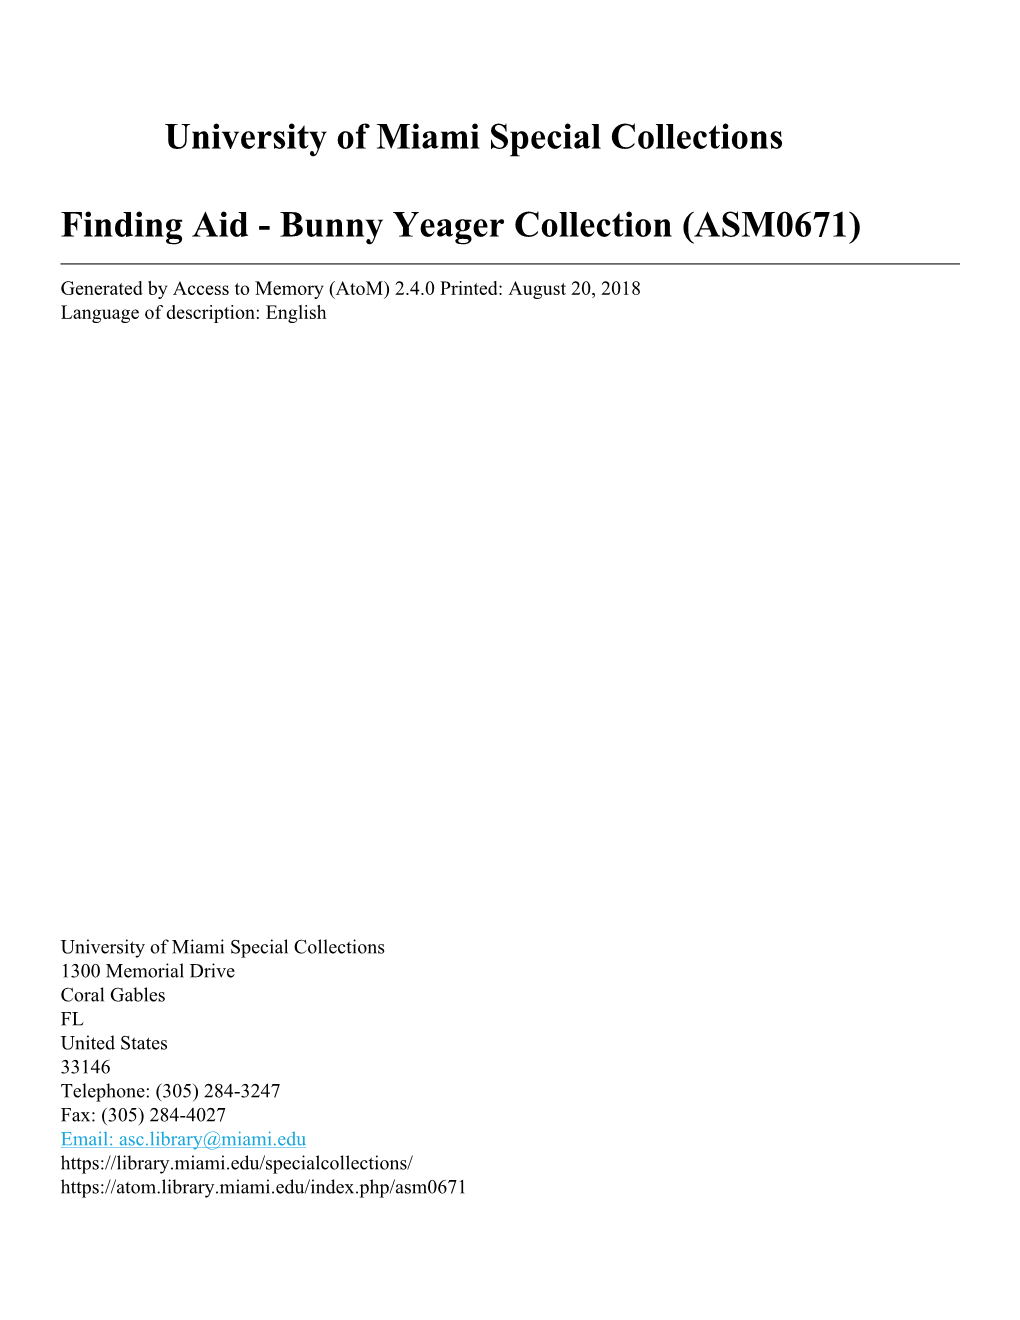 Bunny Yeager Collection (ASM0671)